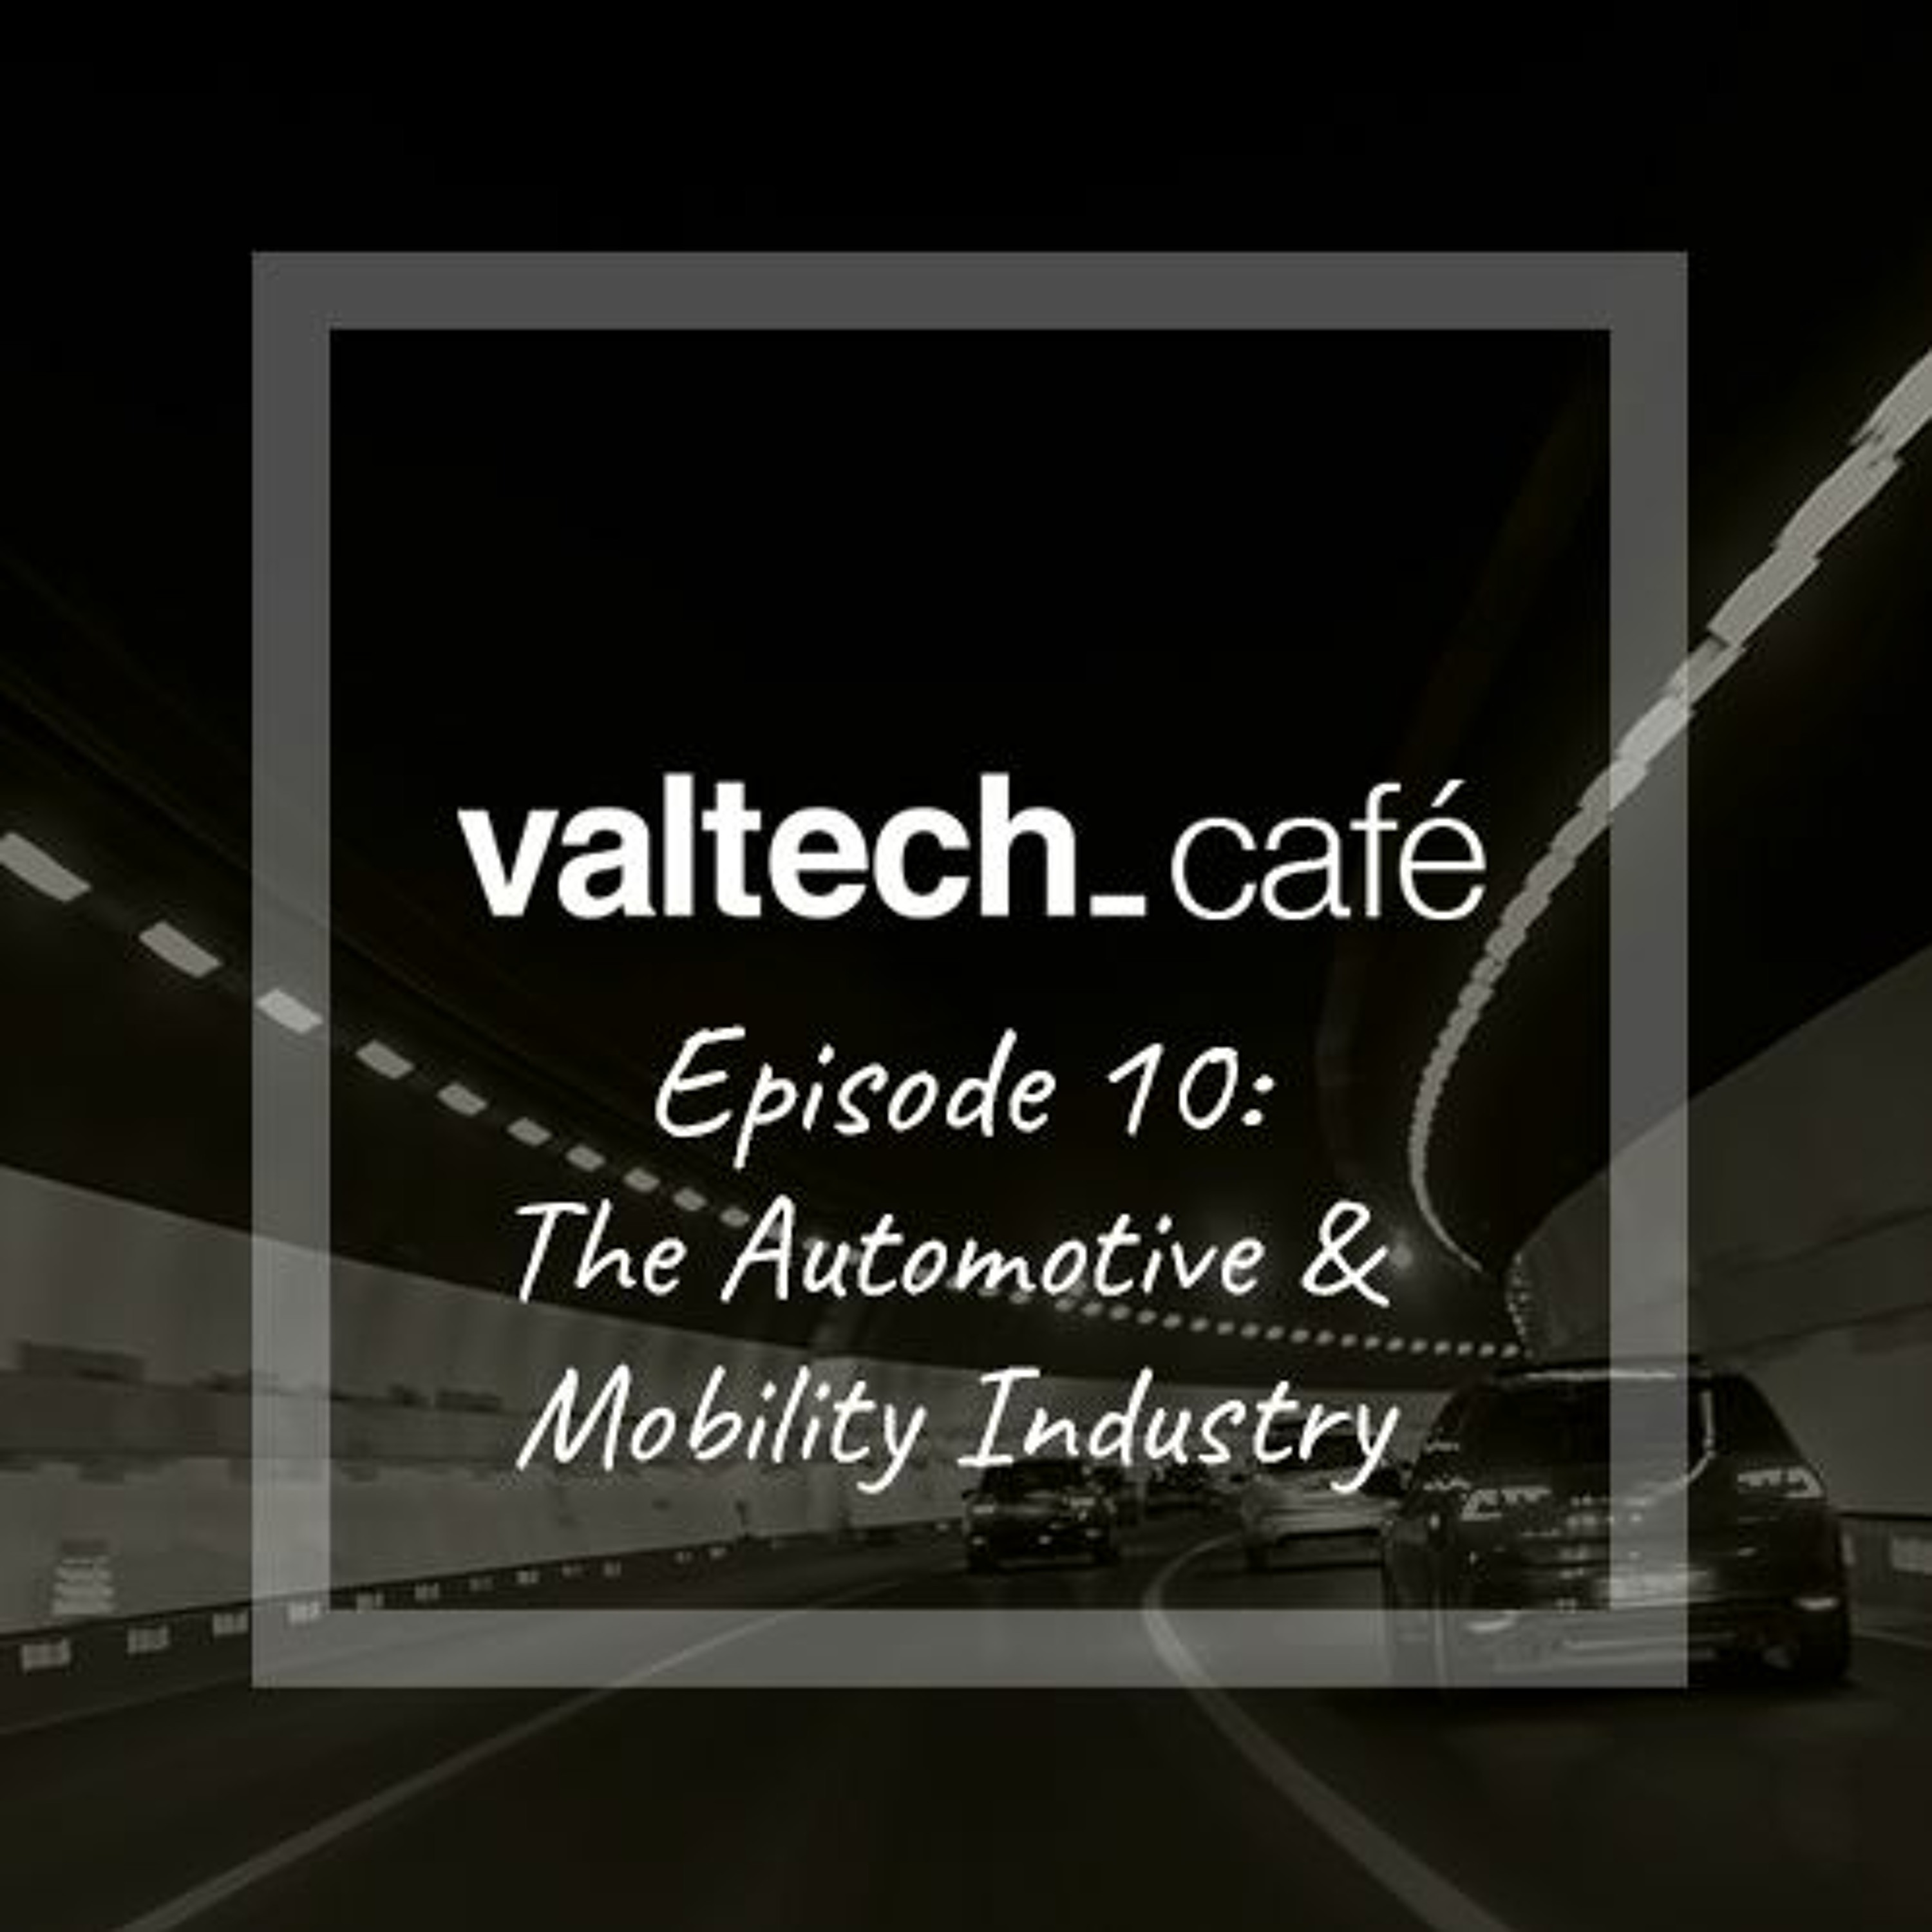 Episode 10: The Automotive & Mobility Industry